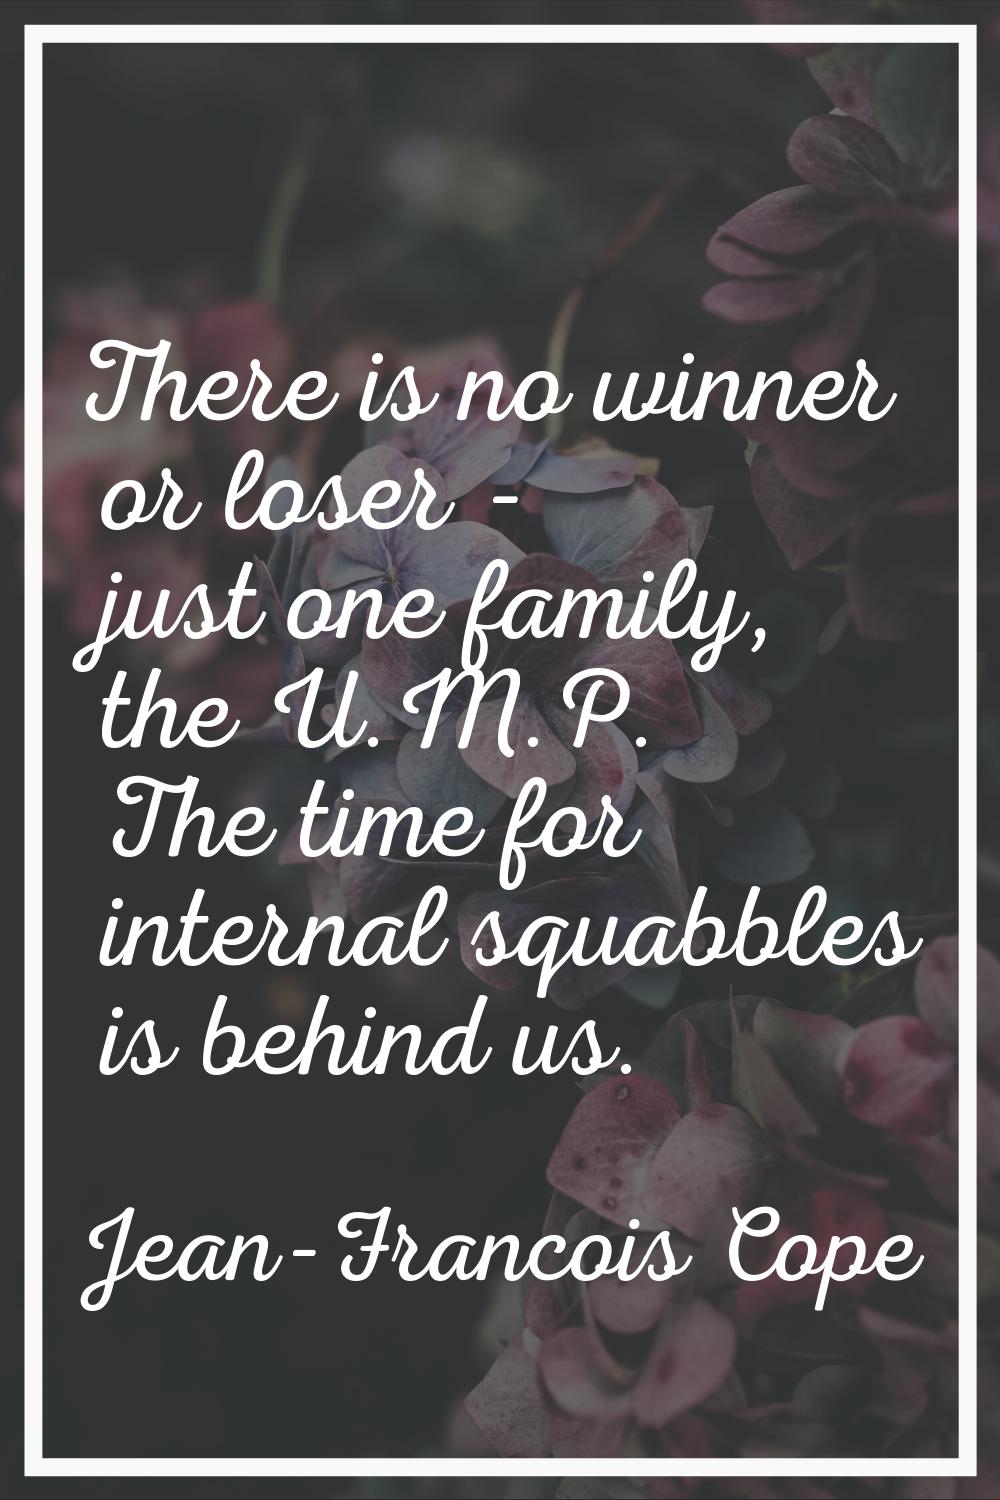 There is no winner or loser - just one family, the U.M.P. The time for internal squabbles is behind